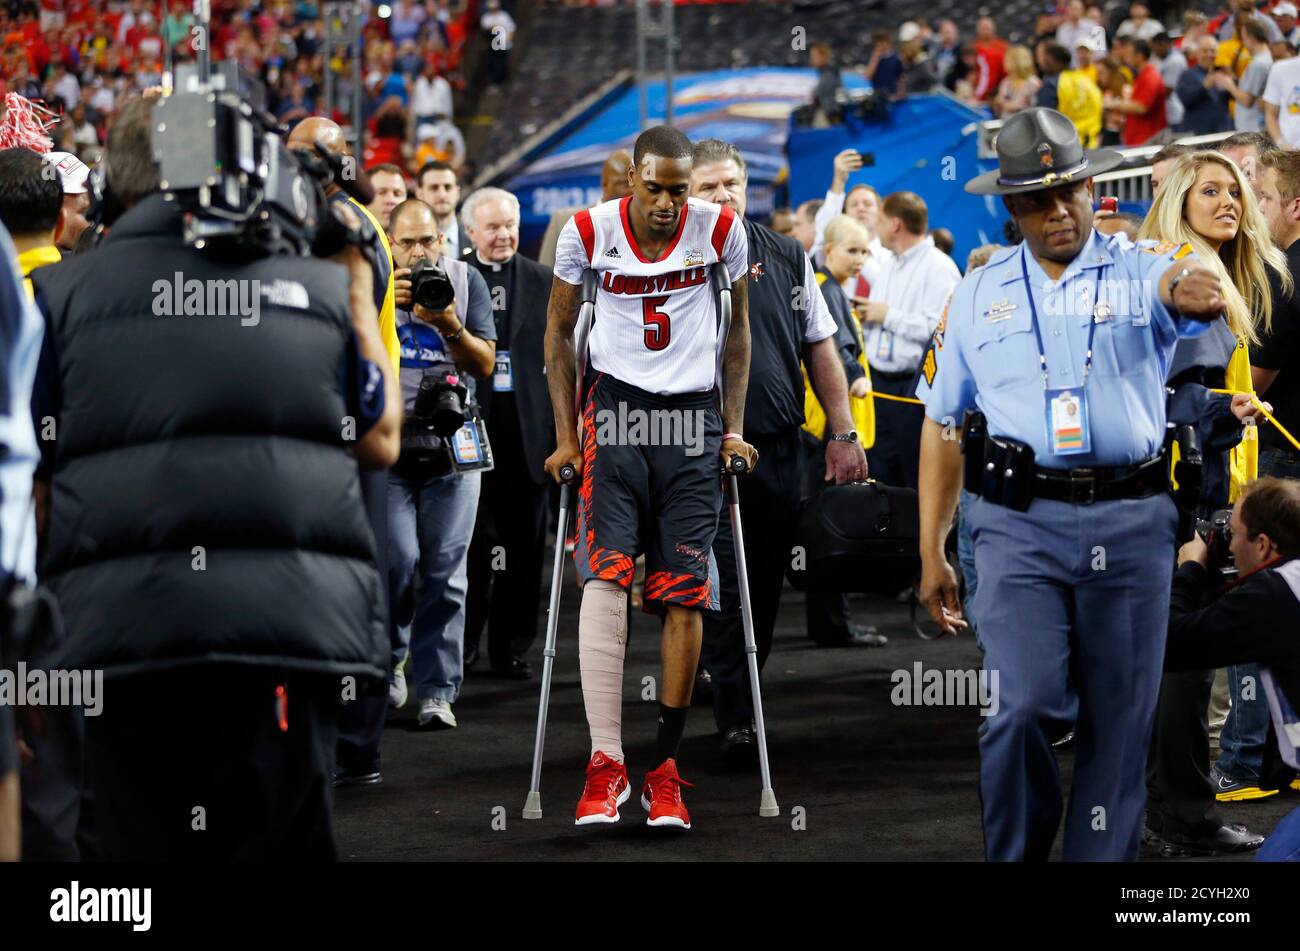 Injured Louisville Cardinals guard Kevin Ware comes to the court ahead of  his team's NCAA men's Final Four basketball game against the Wichita St.  Shockers in Atlanta, Georgia April 6, 2013. REUTERS/Chris